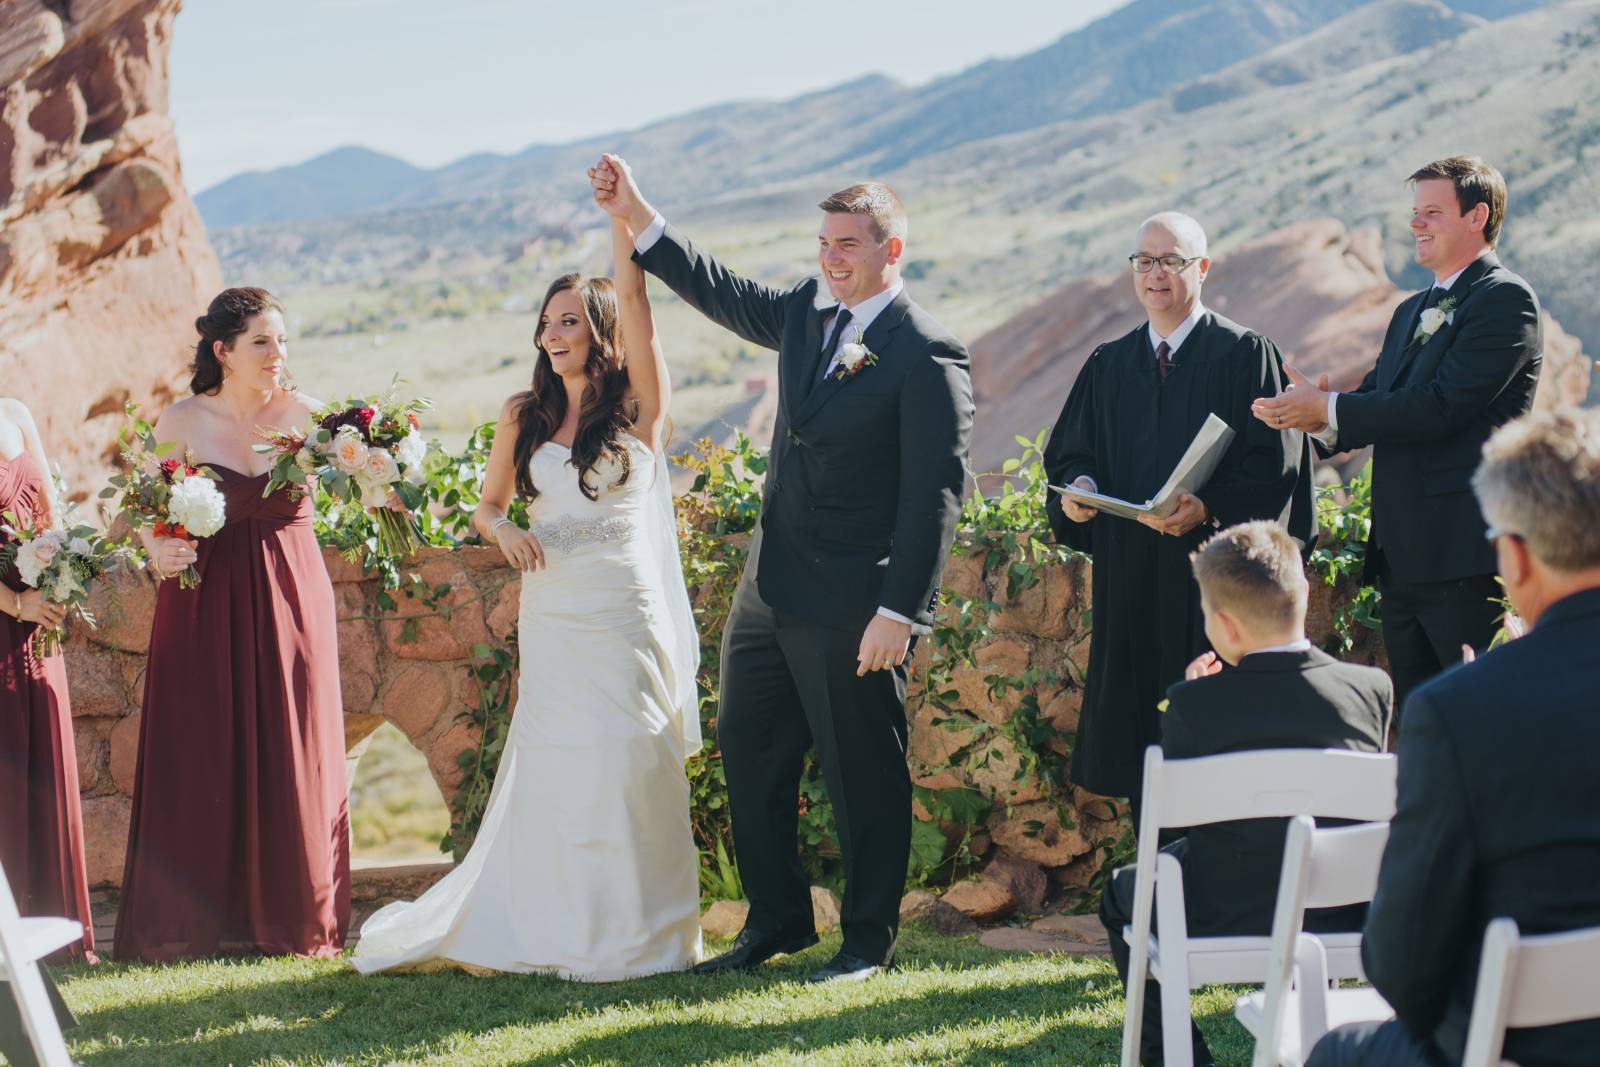 Ceremony at Red Rocks Followed by an Urban Reception